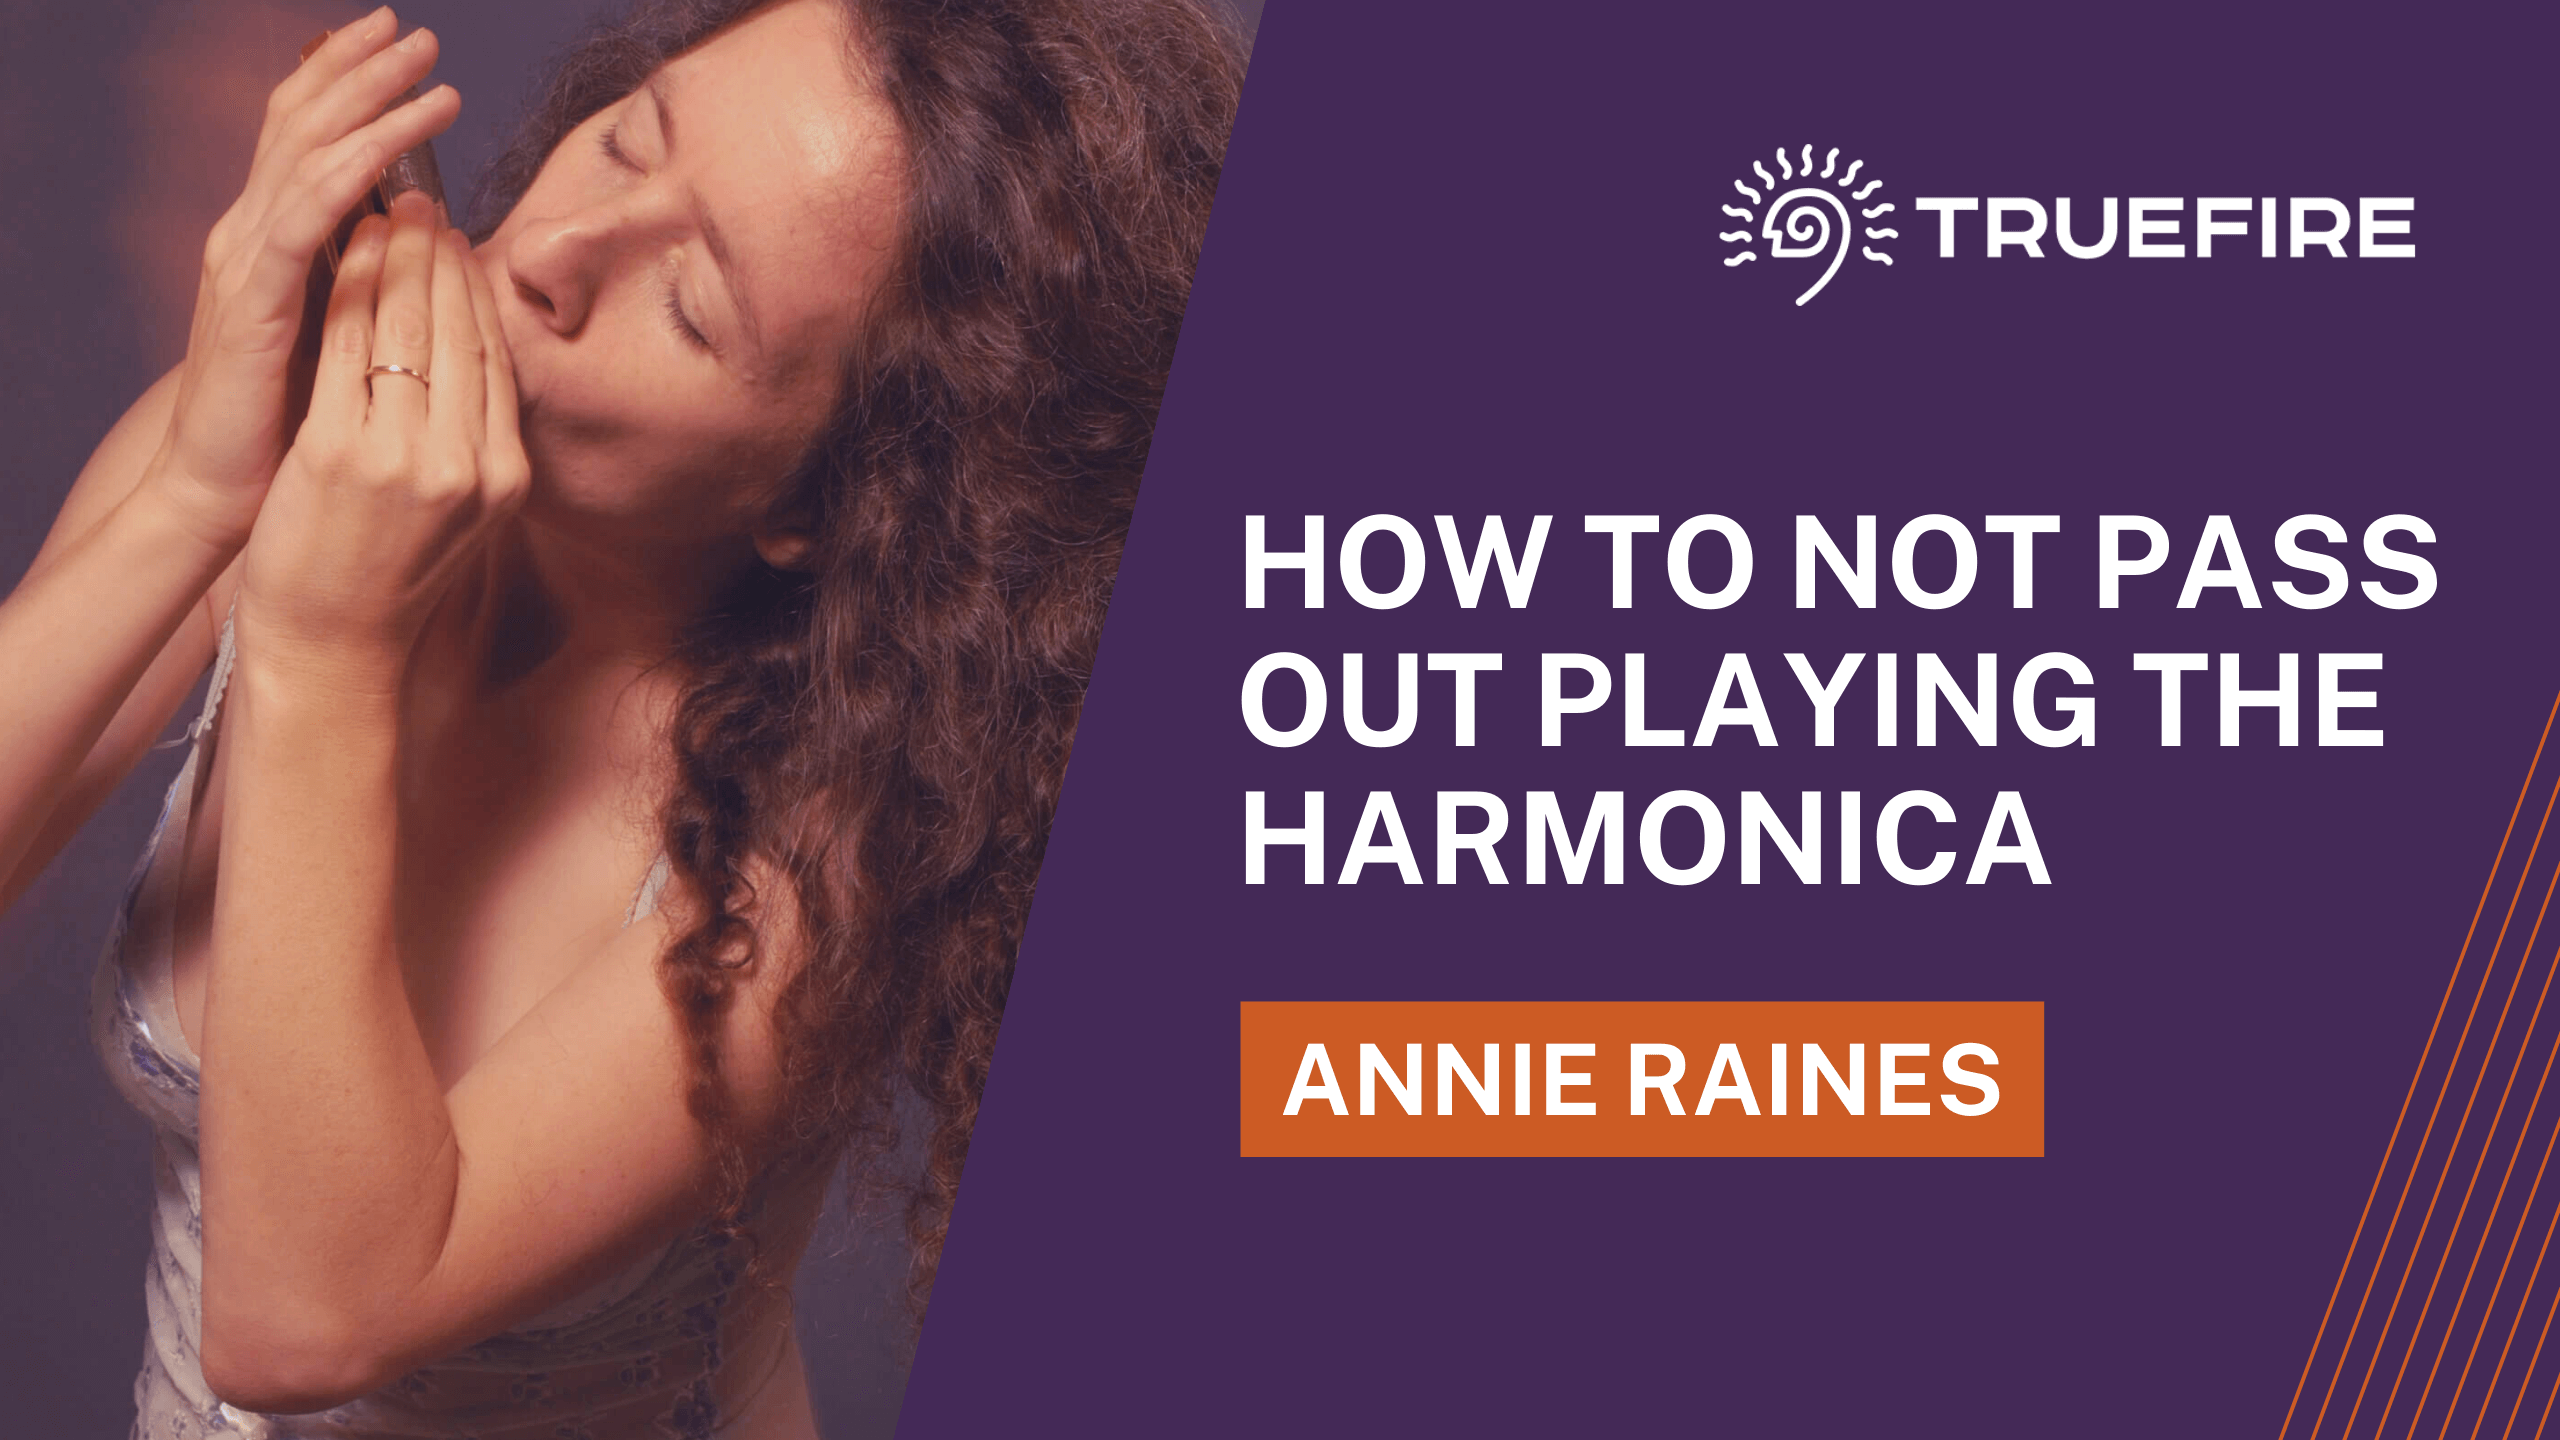 How to Not Pass Out Playing Harmonica